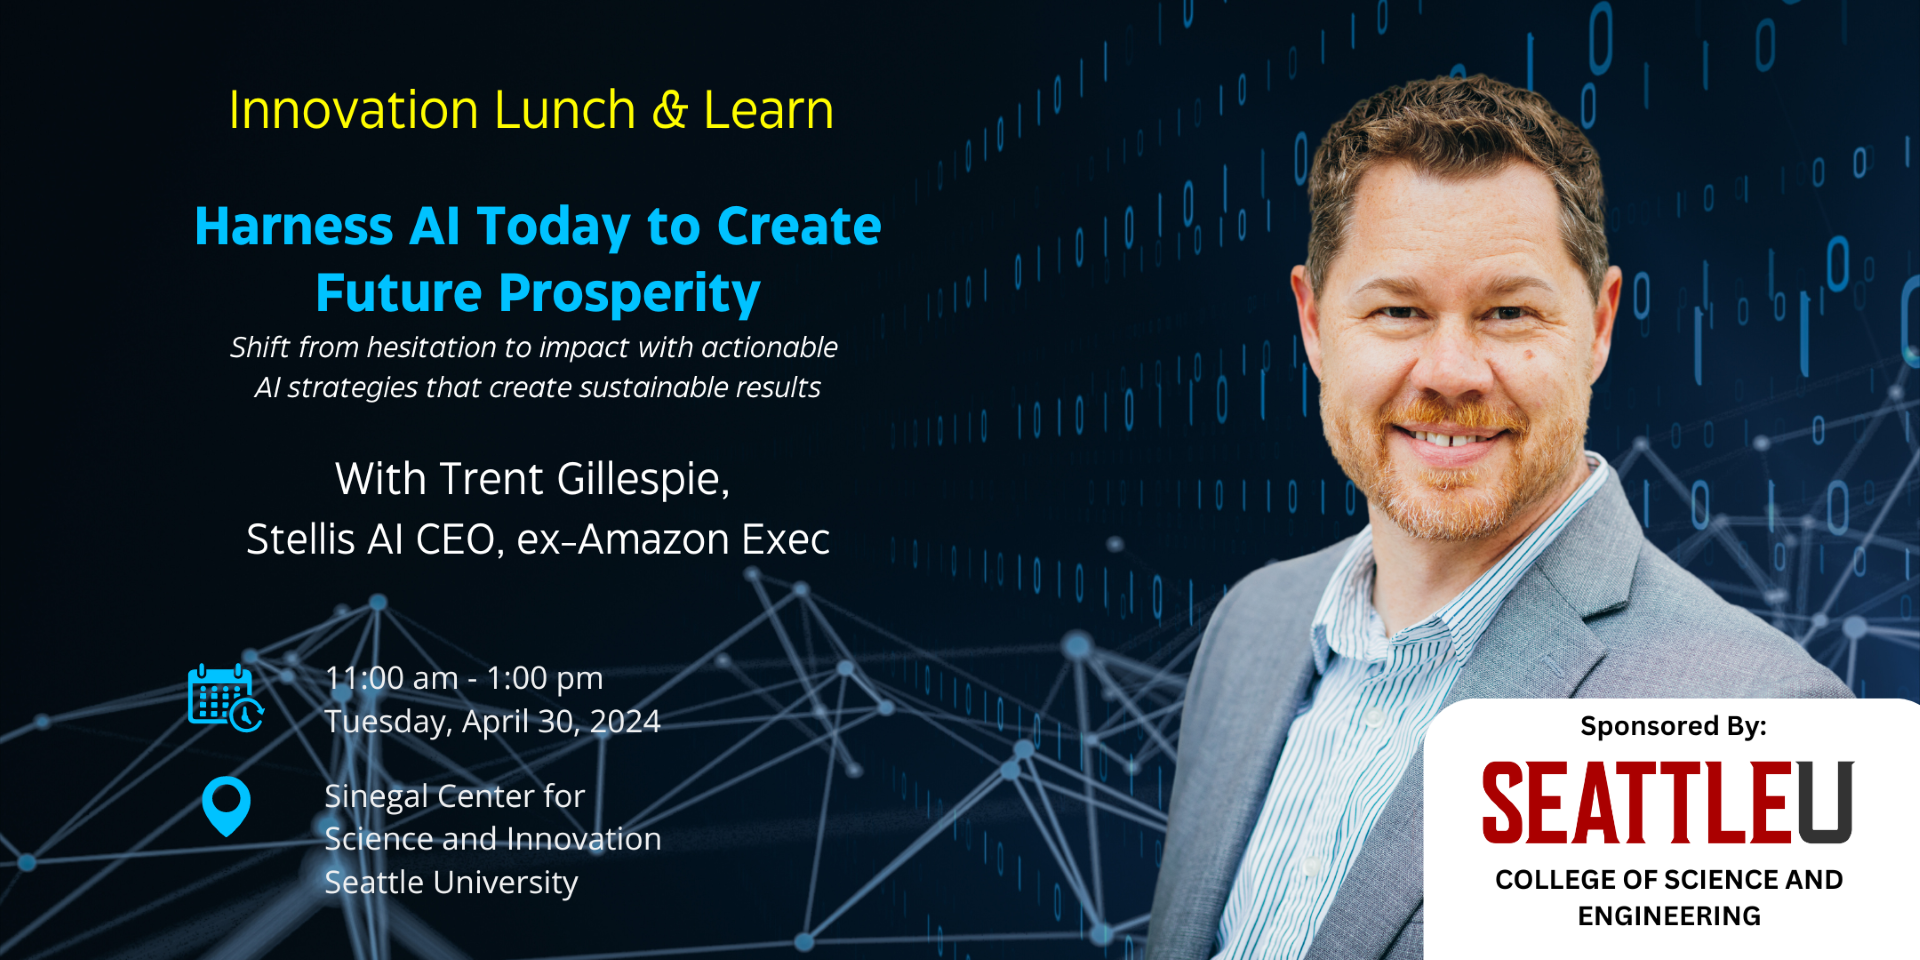 Innovation Lunch and Learn on Harnessing AI